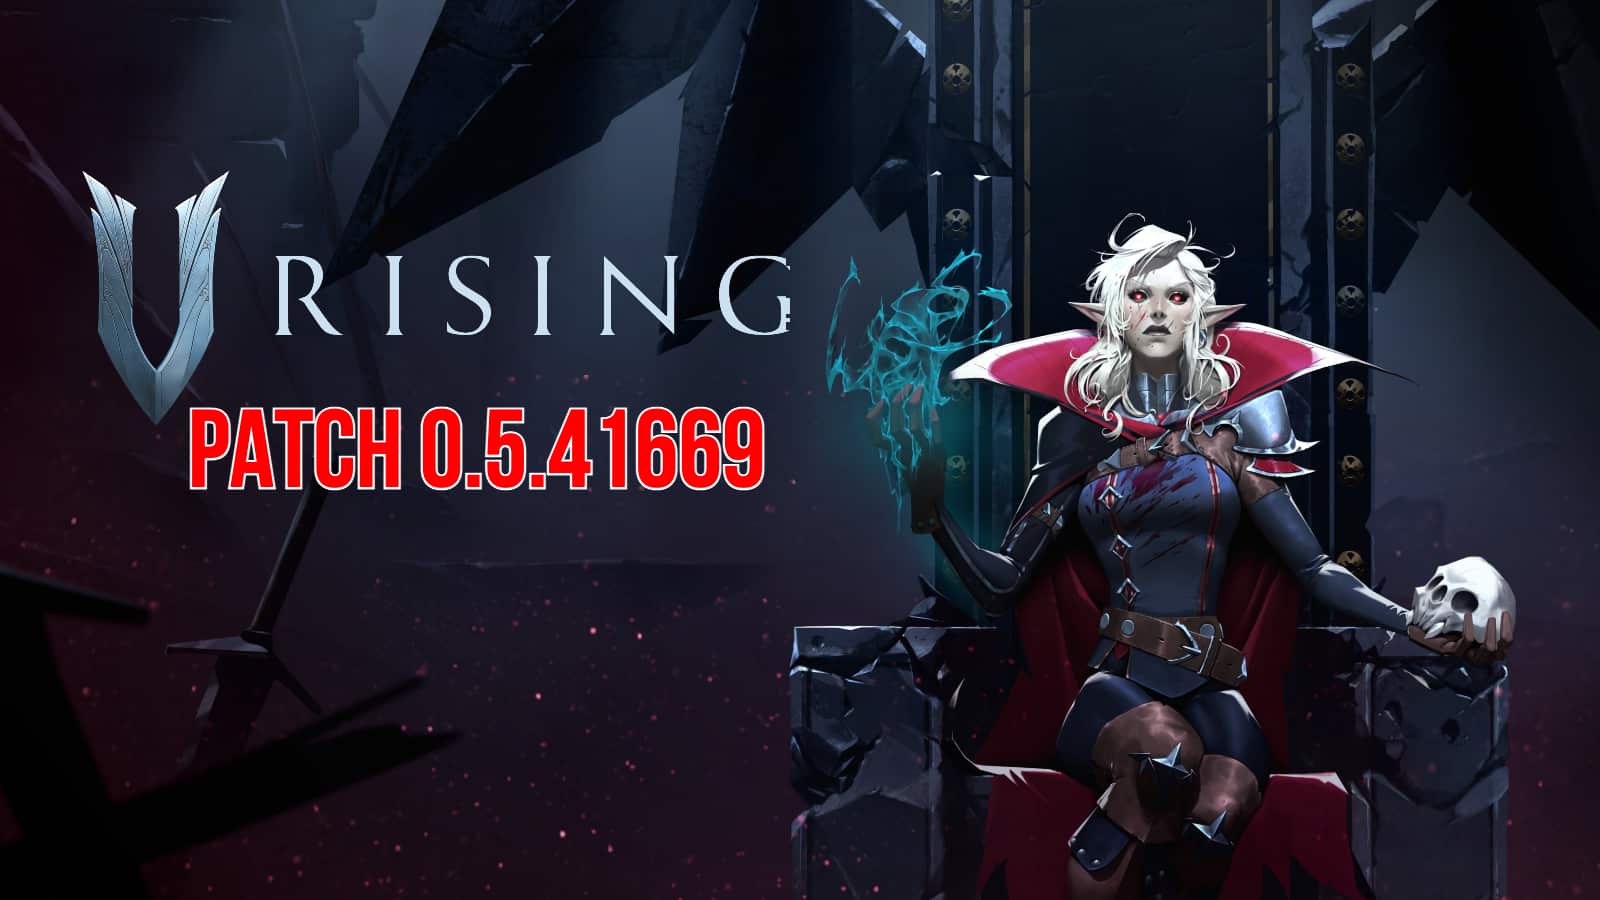 v rising patch 0.5.41669 image female vampire sits on throne casting spell with skull in her hand